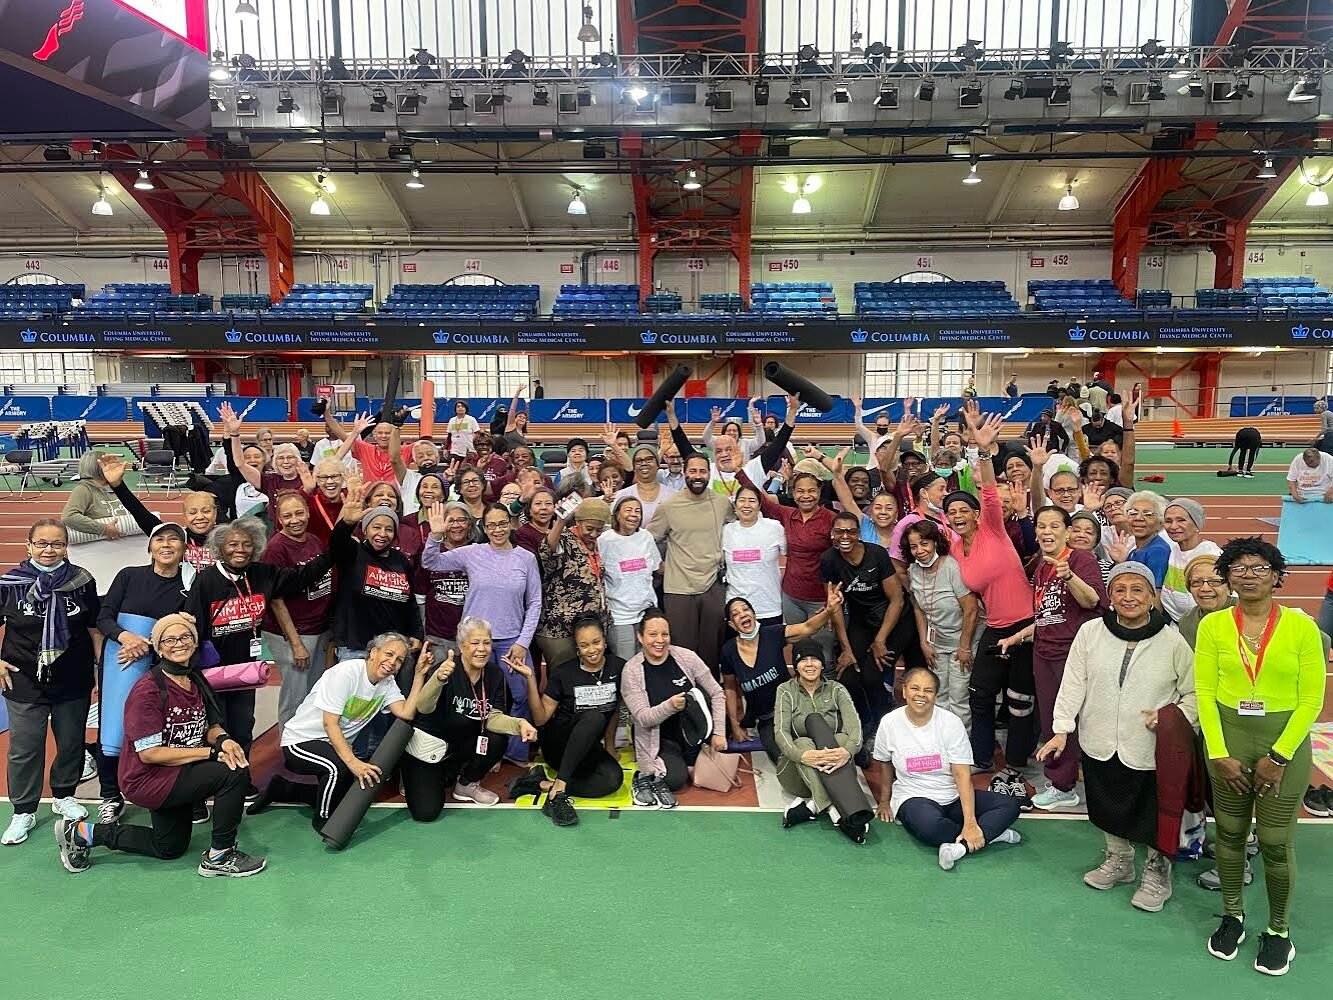 Age is just a number when you&rsquo;re on the path to wellness, health, and community! 💪 Over 150 seniors coming together after a rejuvenating yoga session in The Armory&rsquo;s Seniors AIM High Program. Here&rsquo;s to embracing every moment and nu